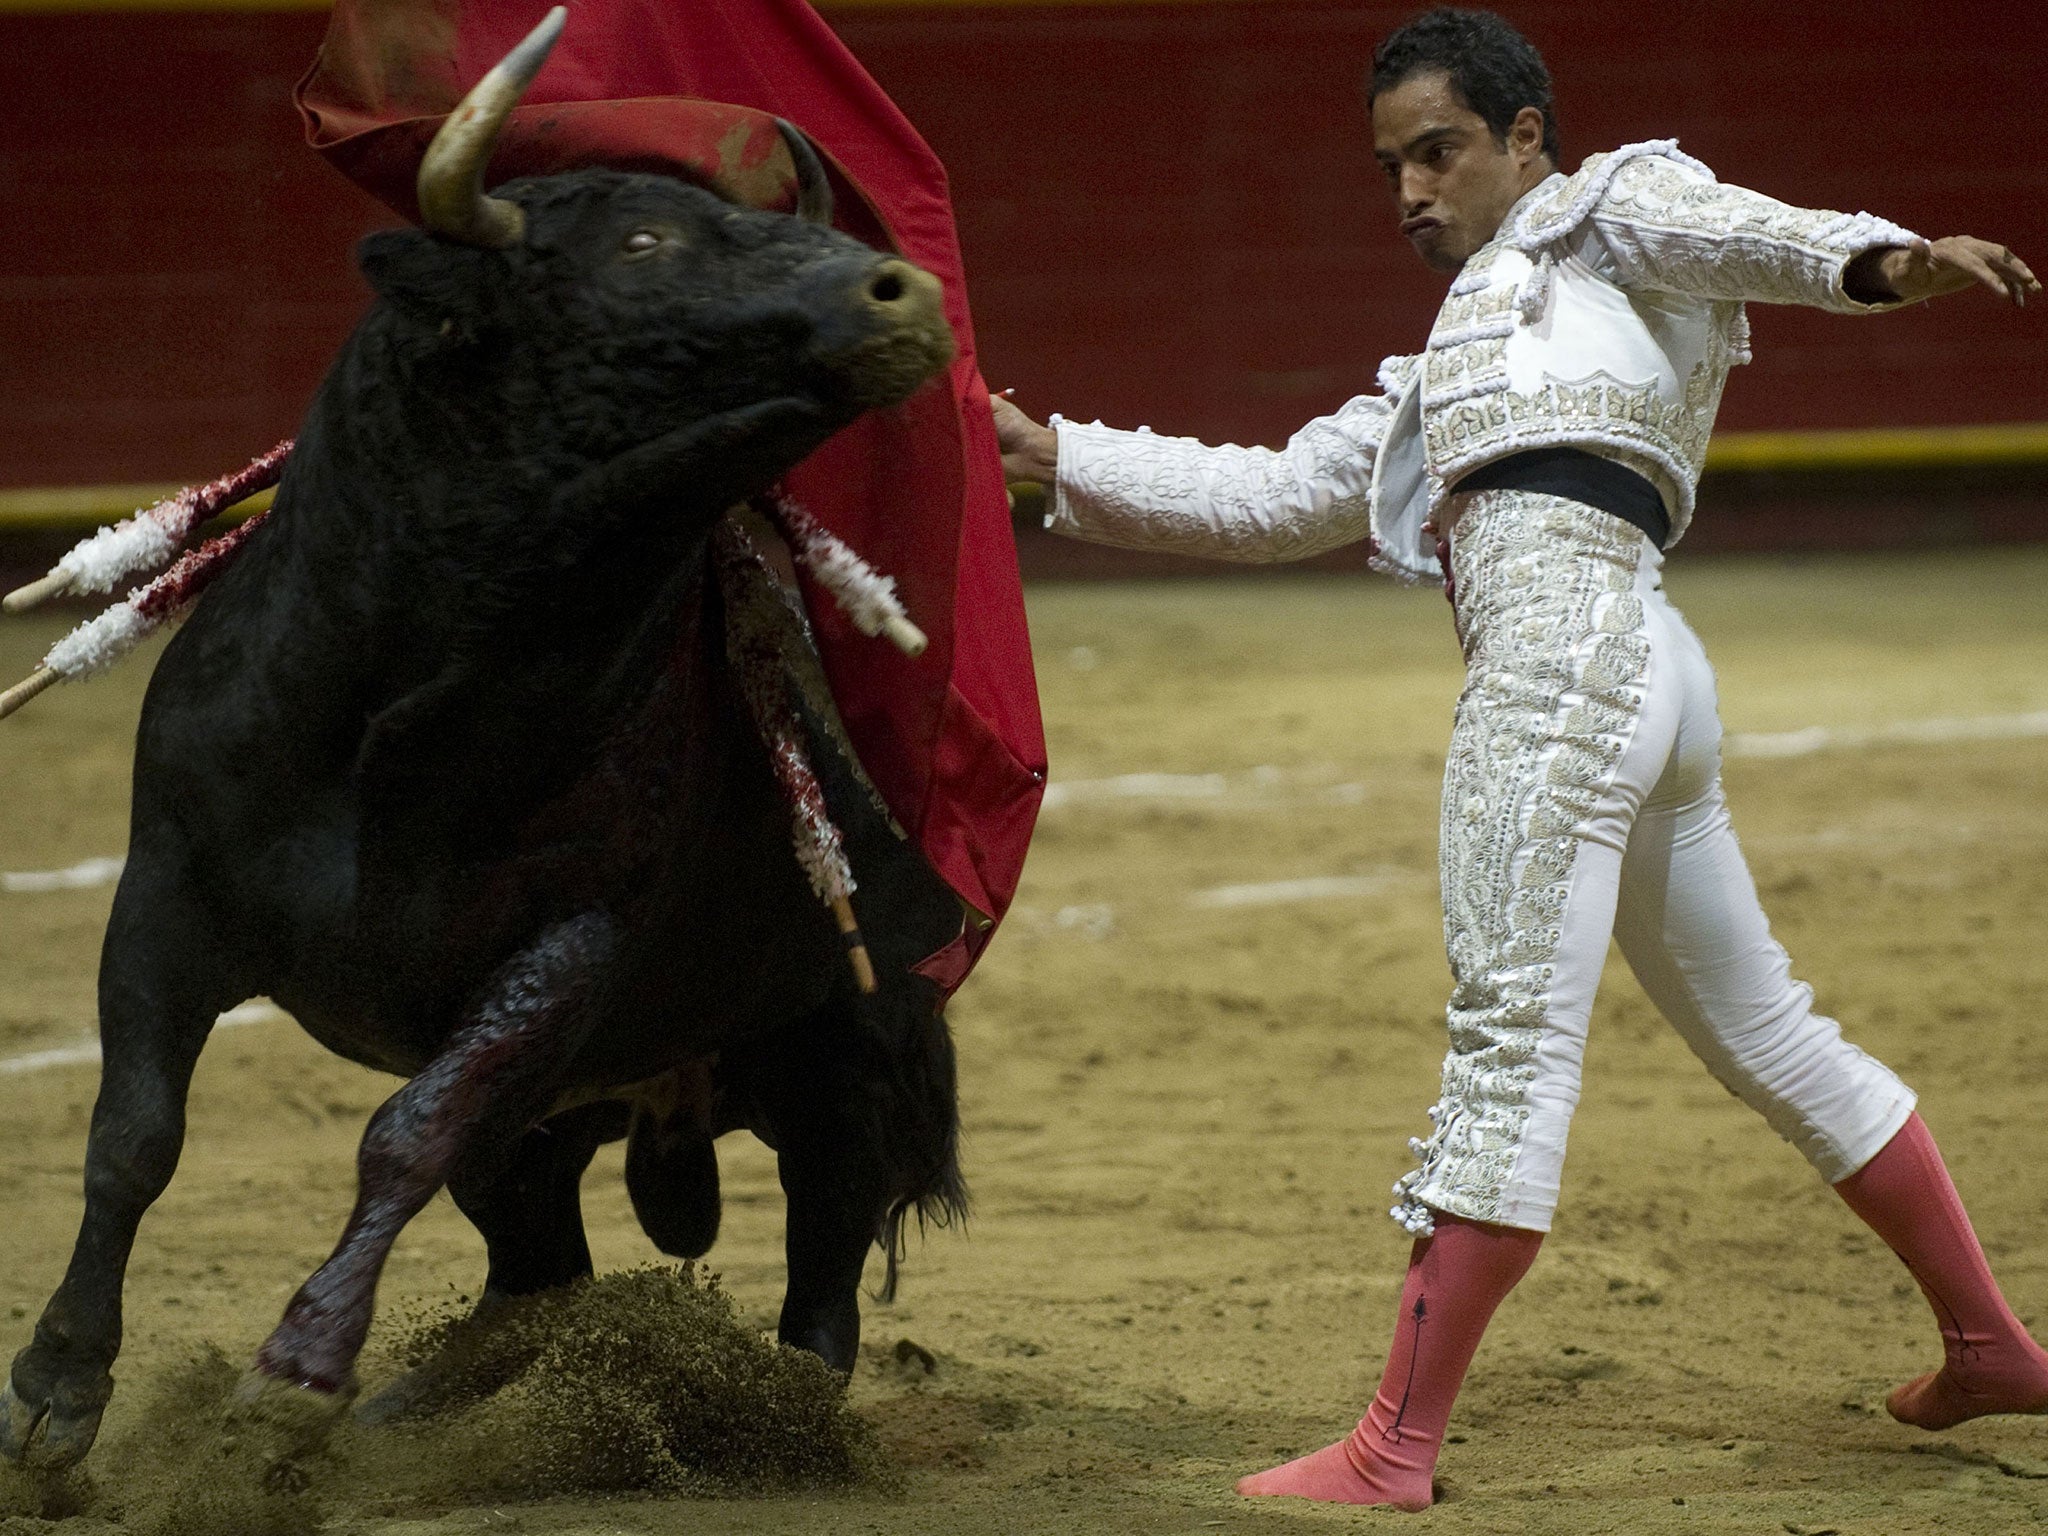 Colombian bullfighter Luis Bolivar performs during a bullfight at La Macarena